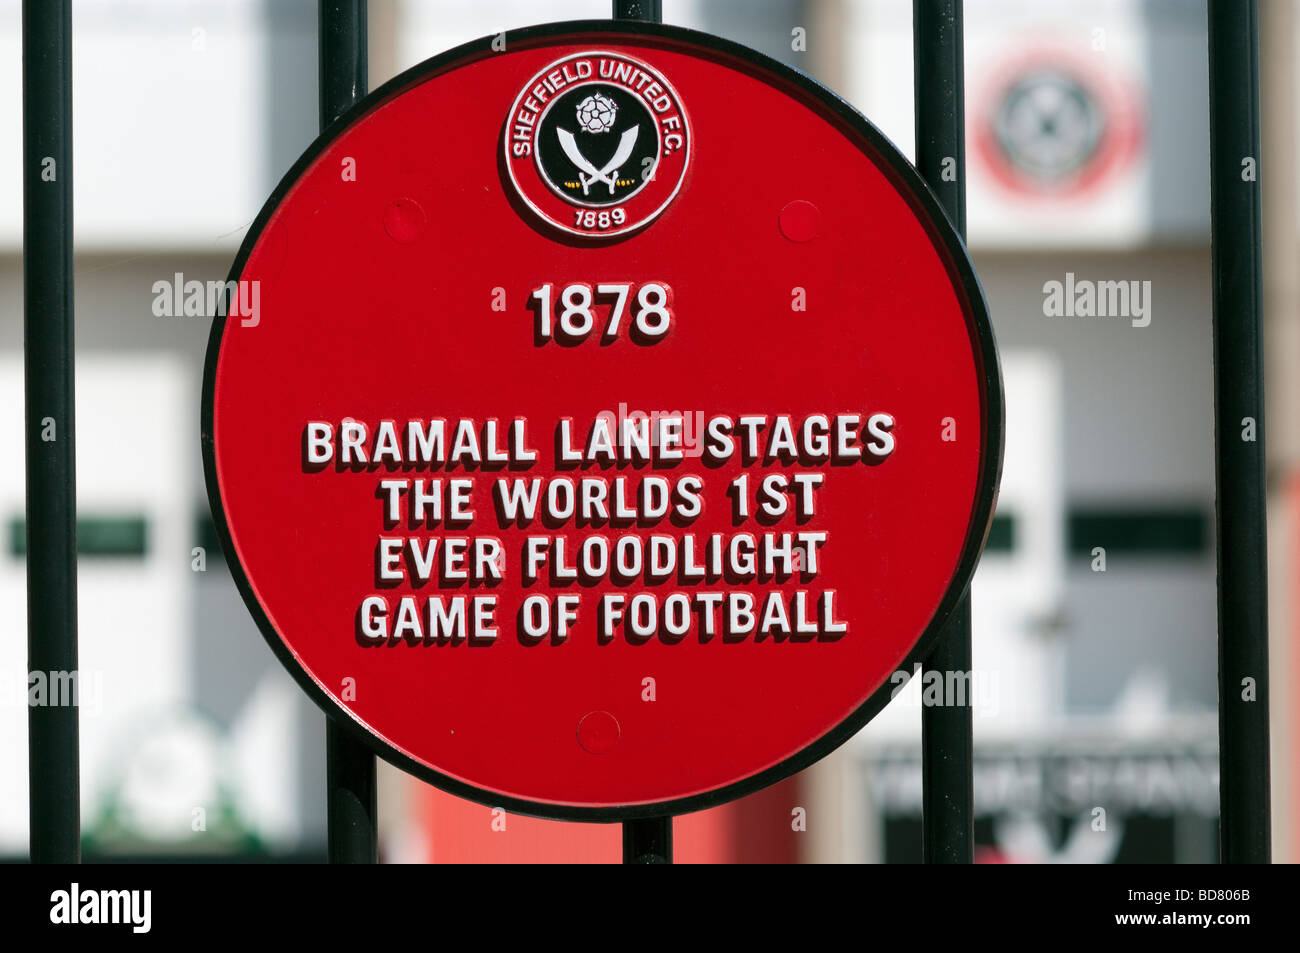 Red circular commemorative plaque 'Bramall Lane' stages the worlds 1st Floodlit game of football Stock Photo